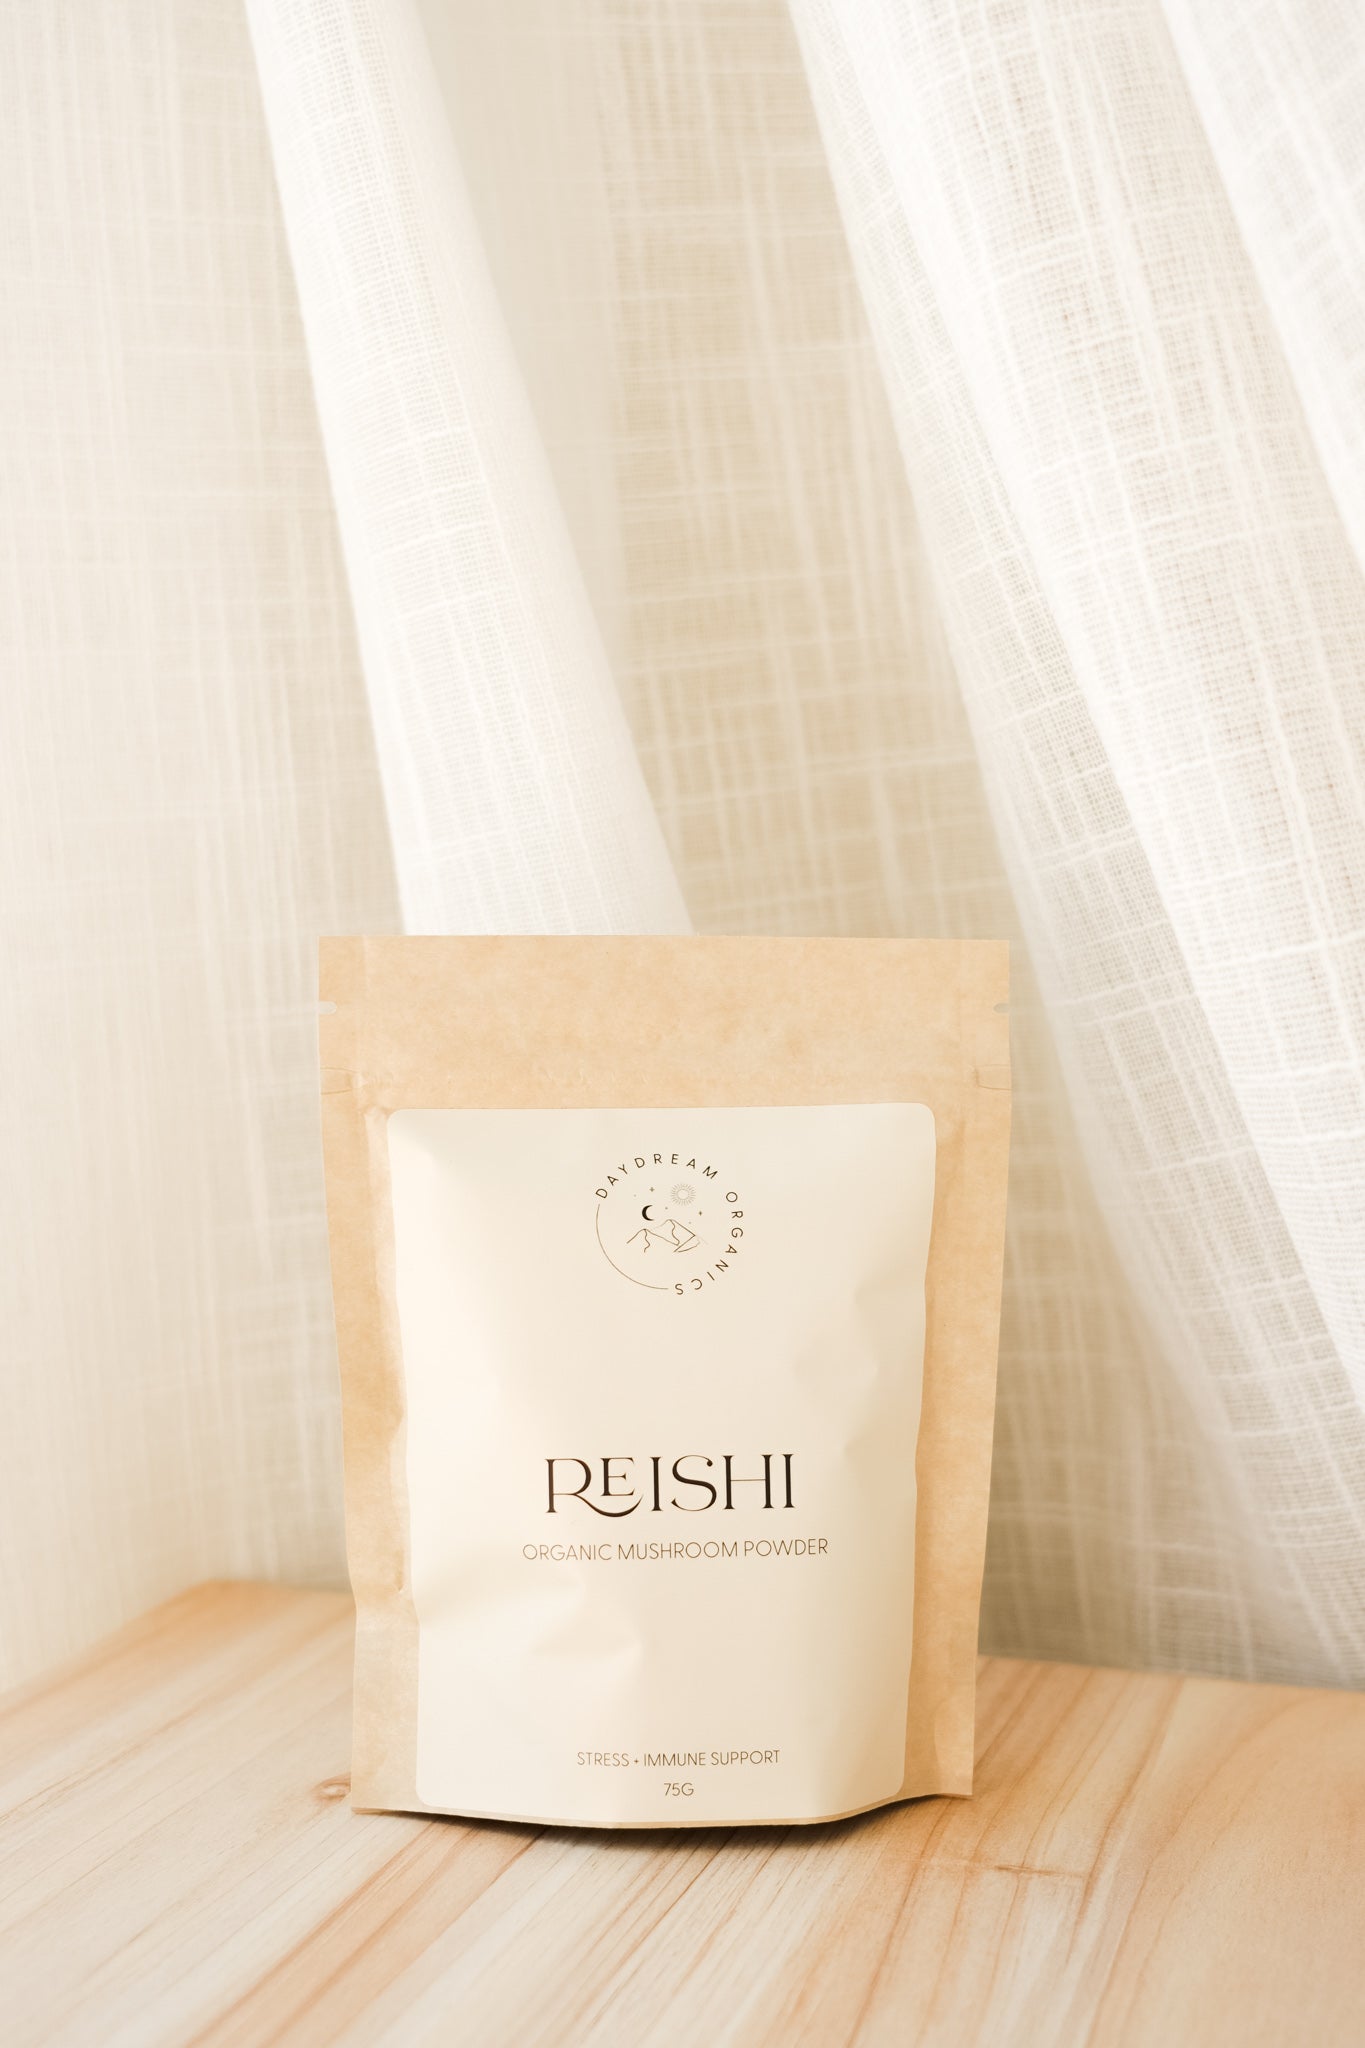 Known as the "mushroom of immortality" or "the queen of medicinal mushrooms", our organic Reishi mushroom powder can be used to support the immune system and as an adaptogen to help support the mind and body's resistance to stress.